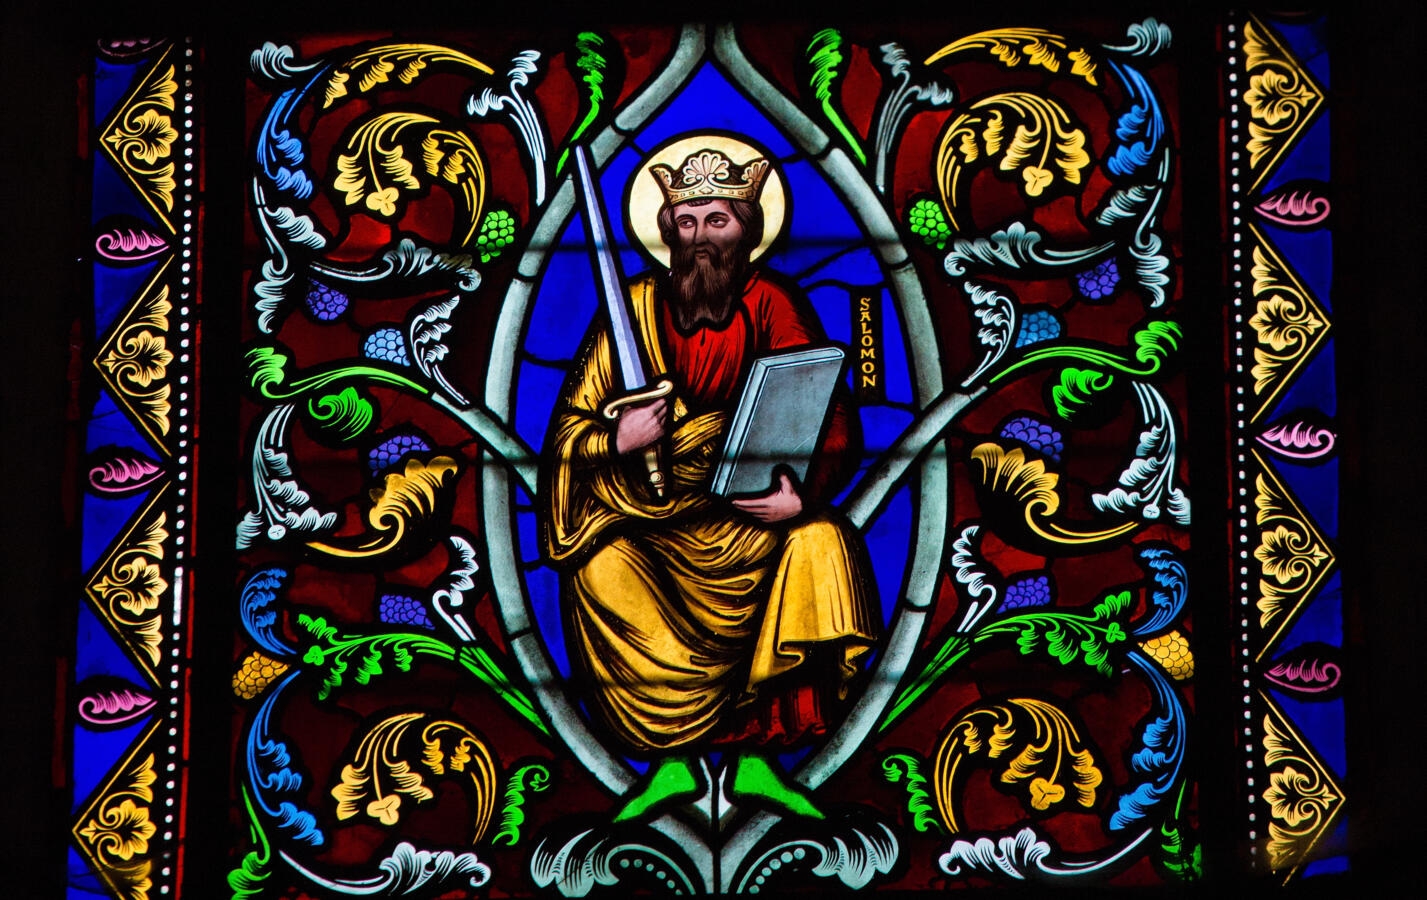 stained glass window depicting a king holding a sword and a book